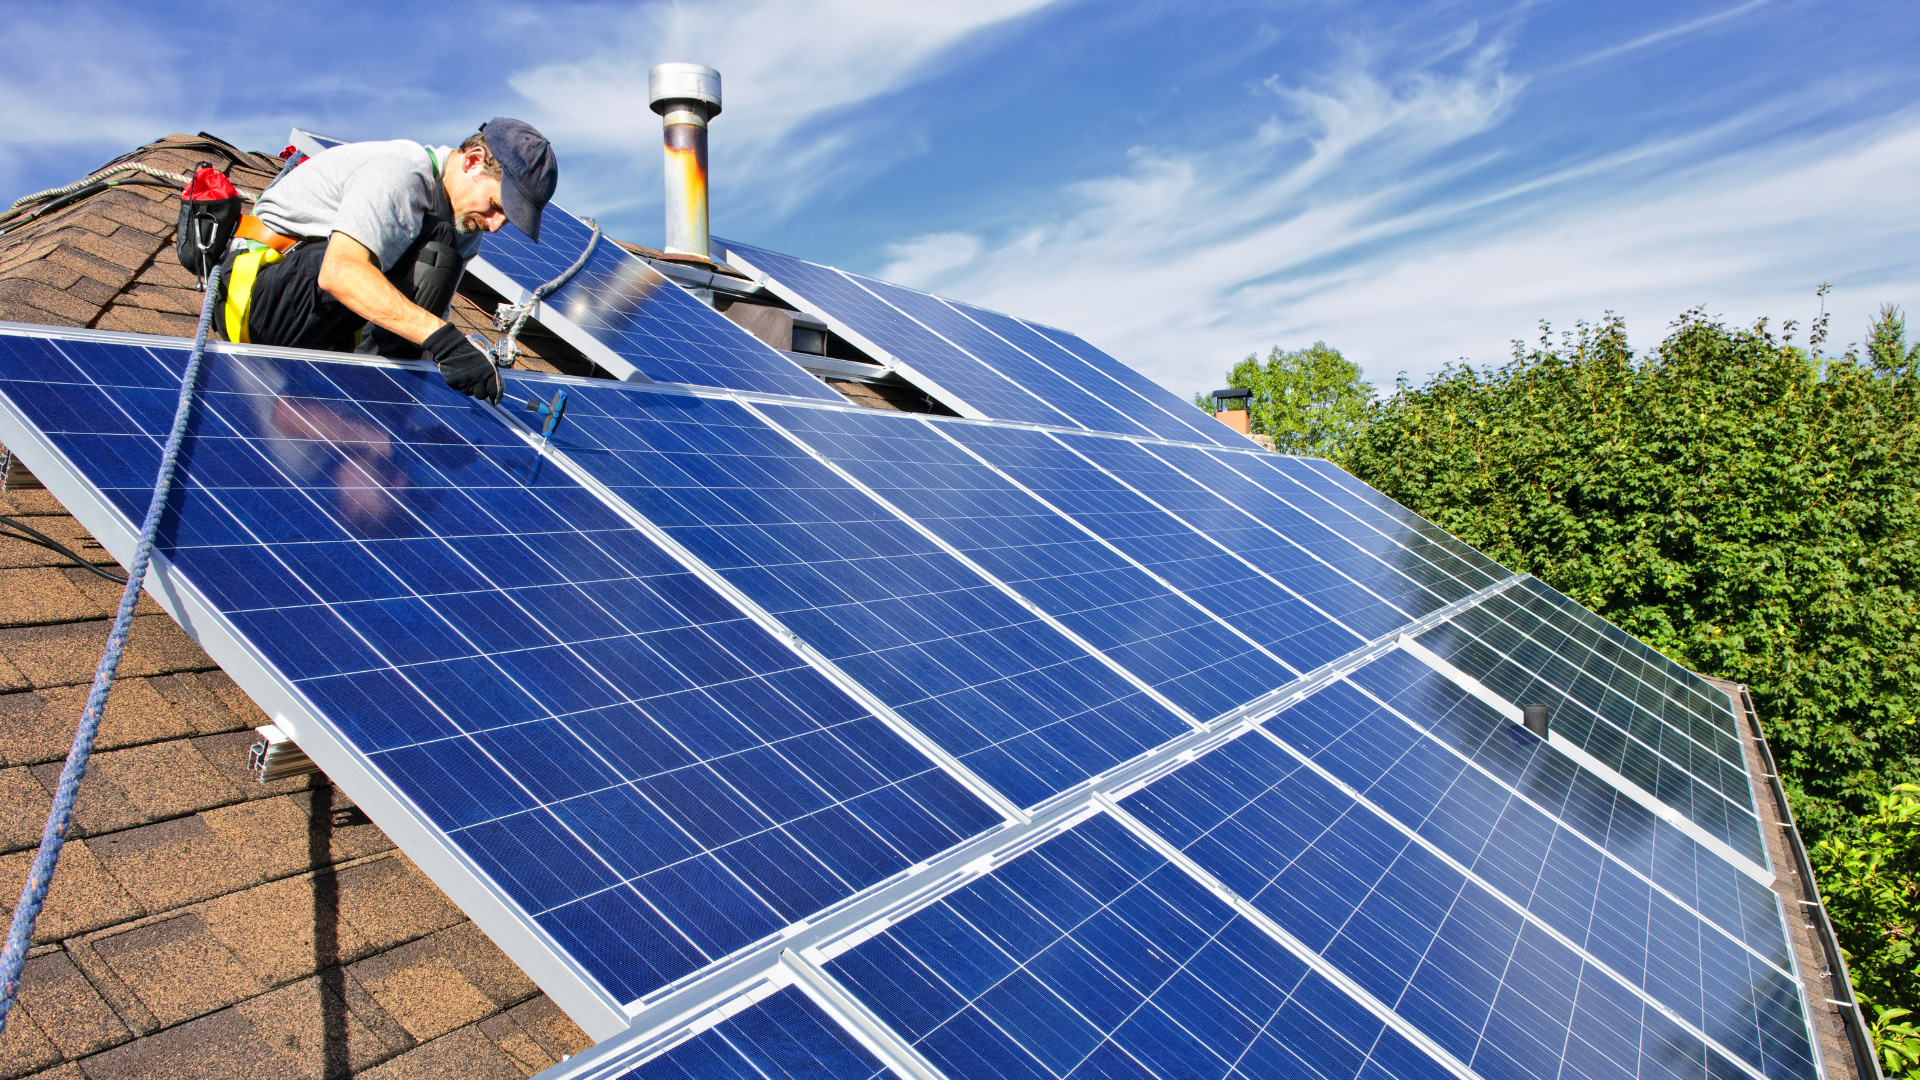 When Is the Best Time To Install Solar Panels in Arizona?